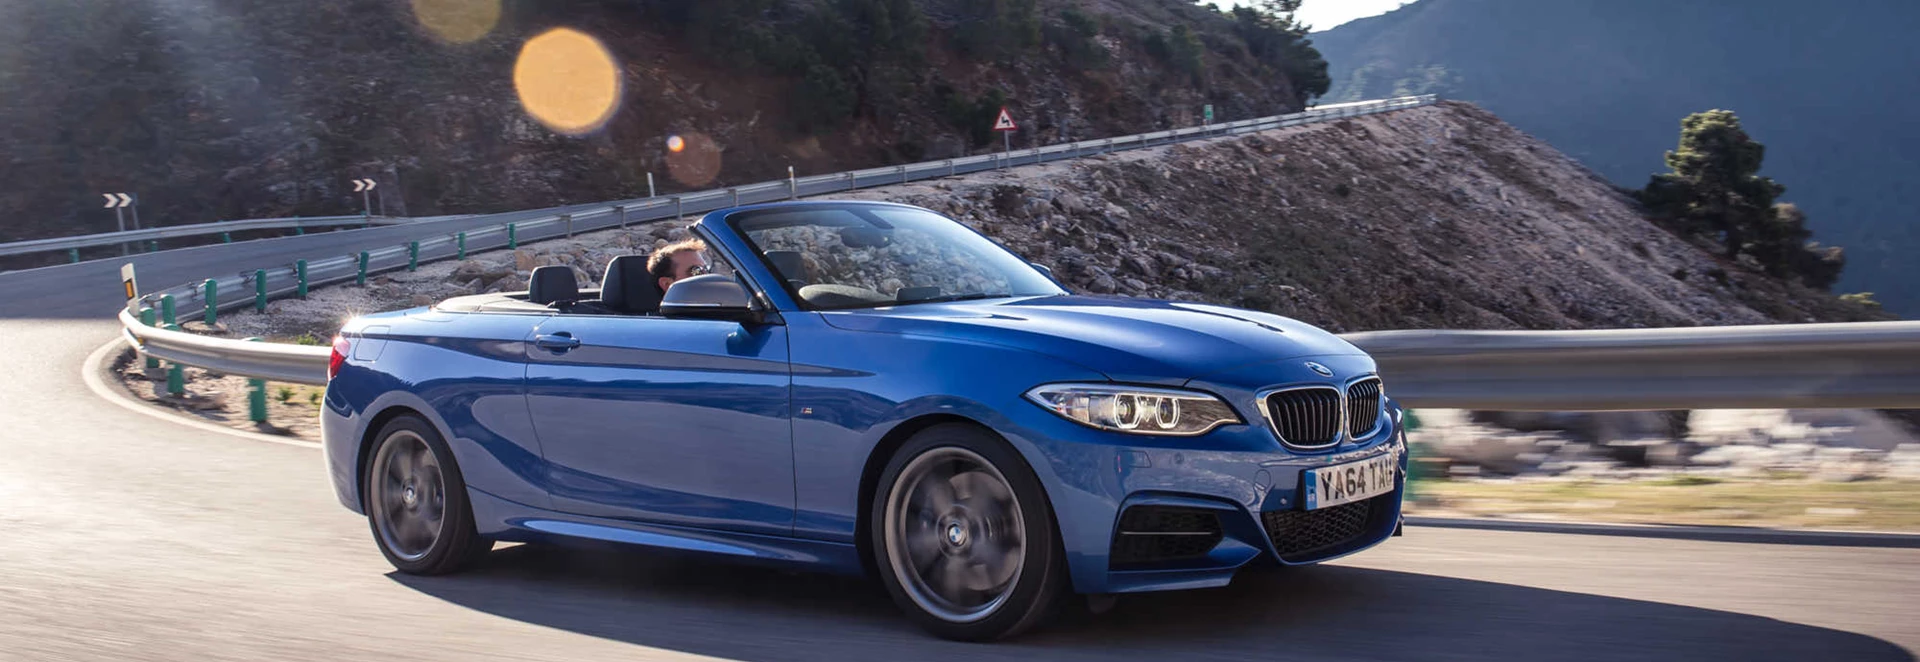 BMW 2 Series convertible review 